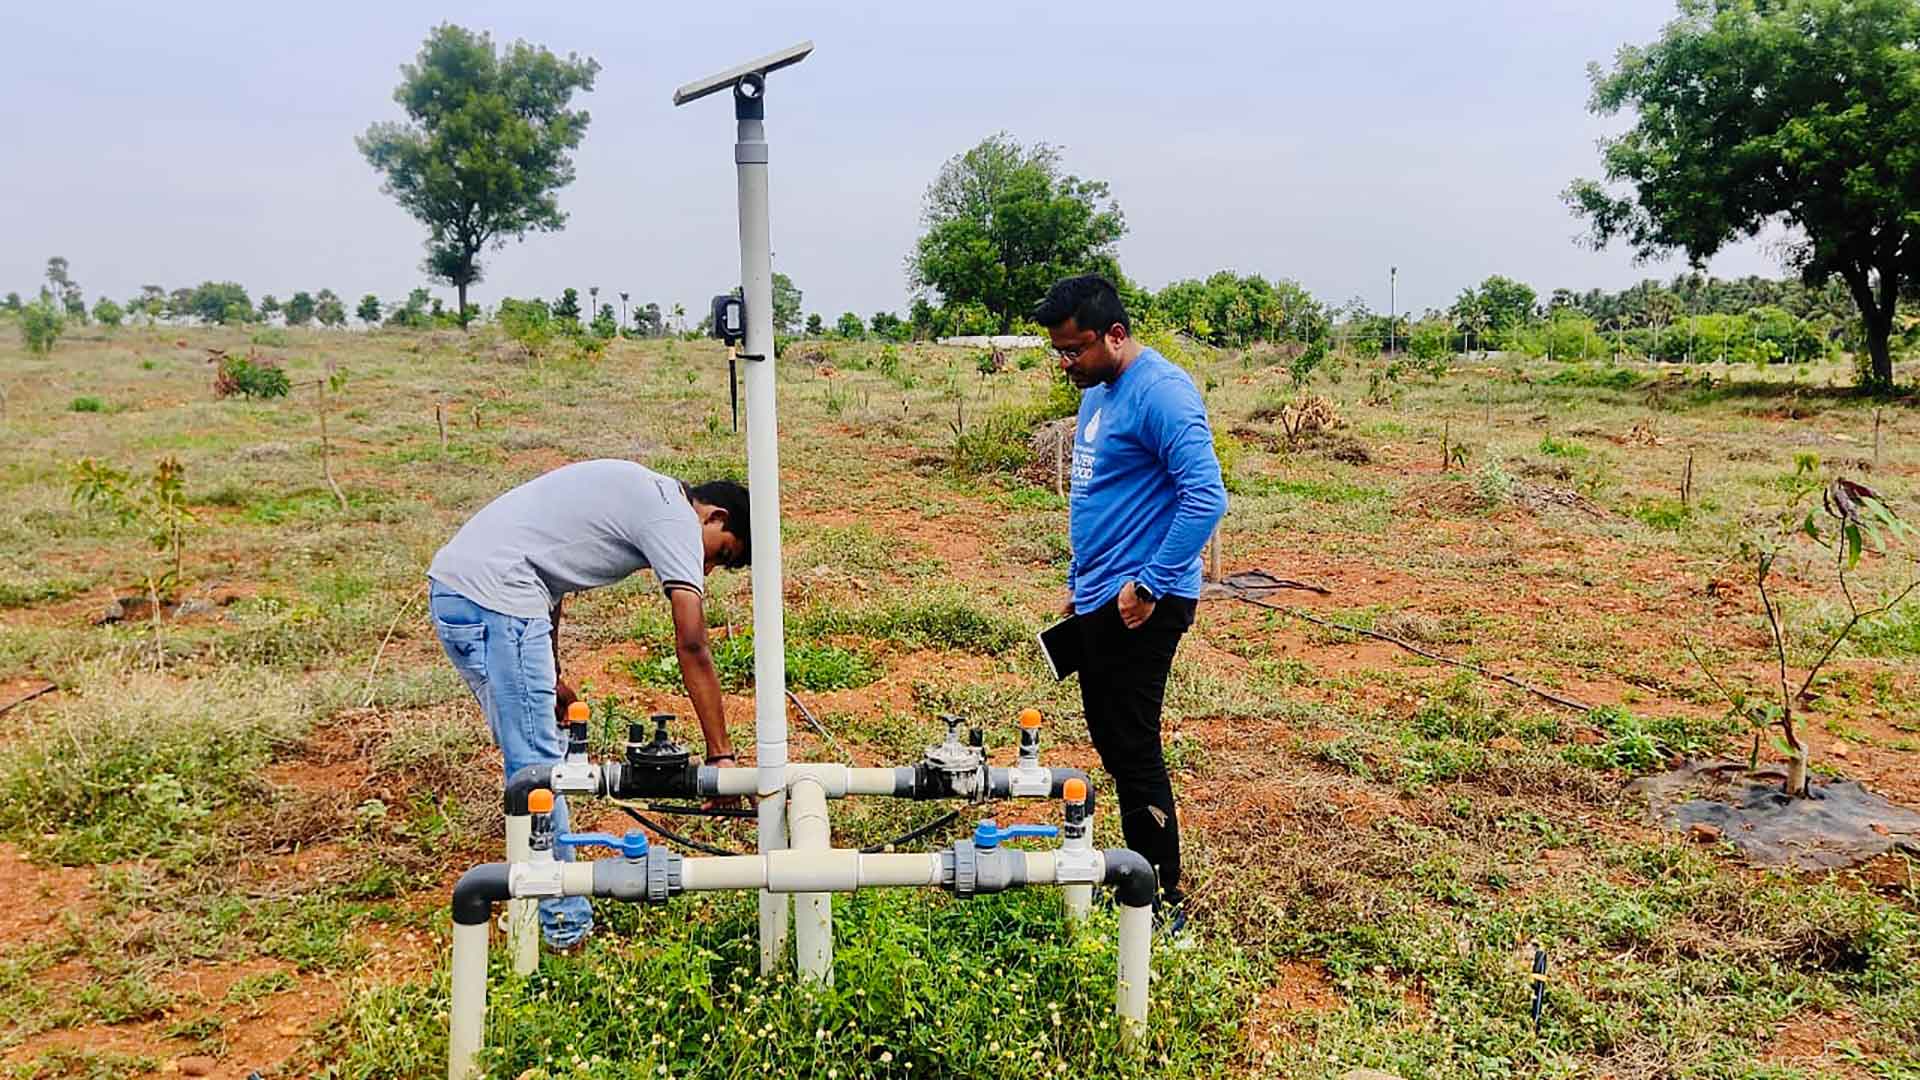 Two people working on irrigation valves